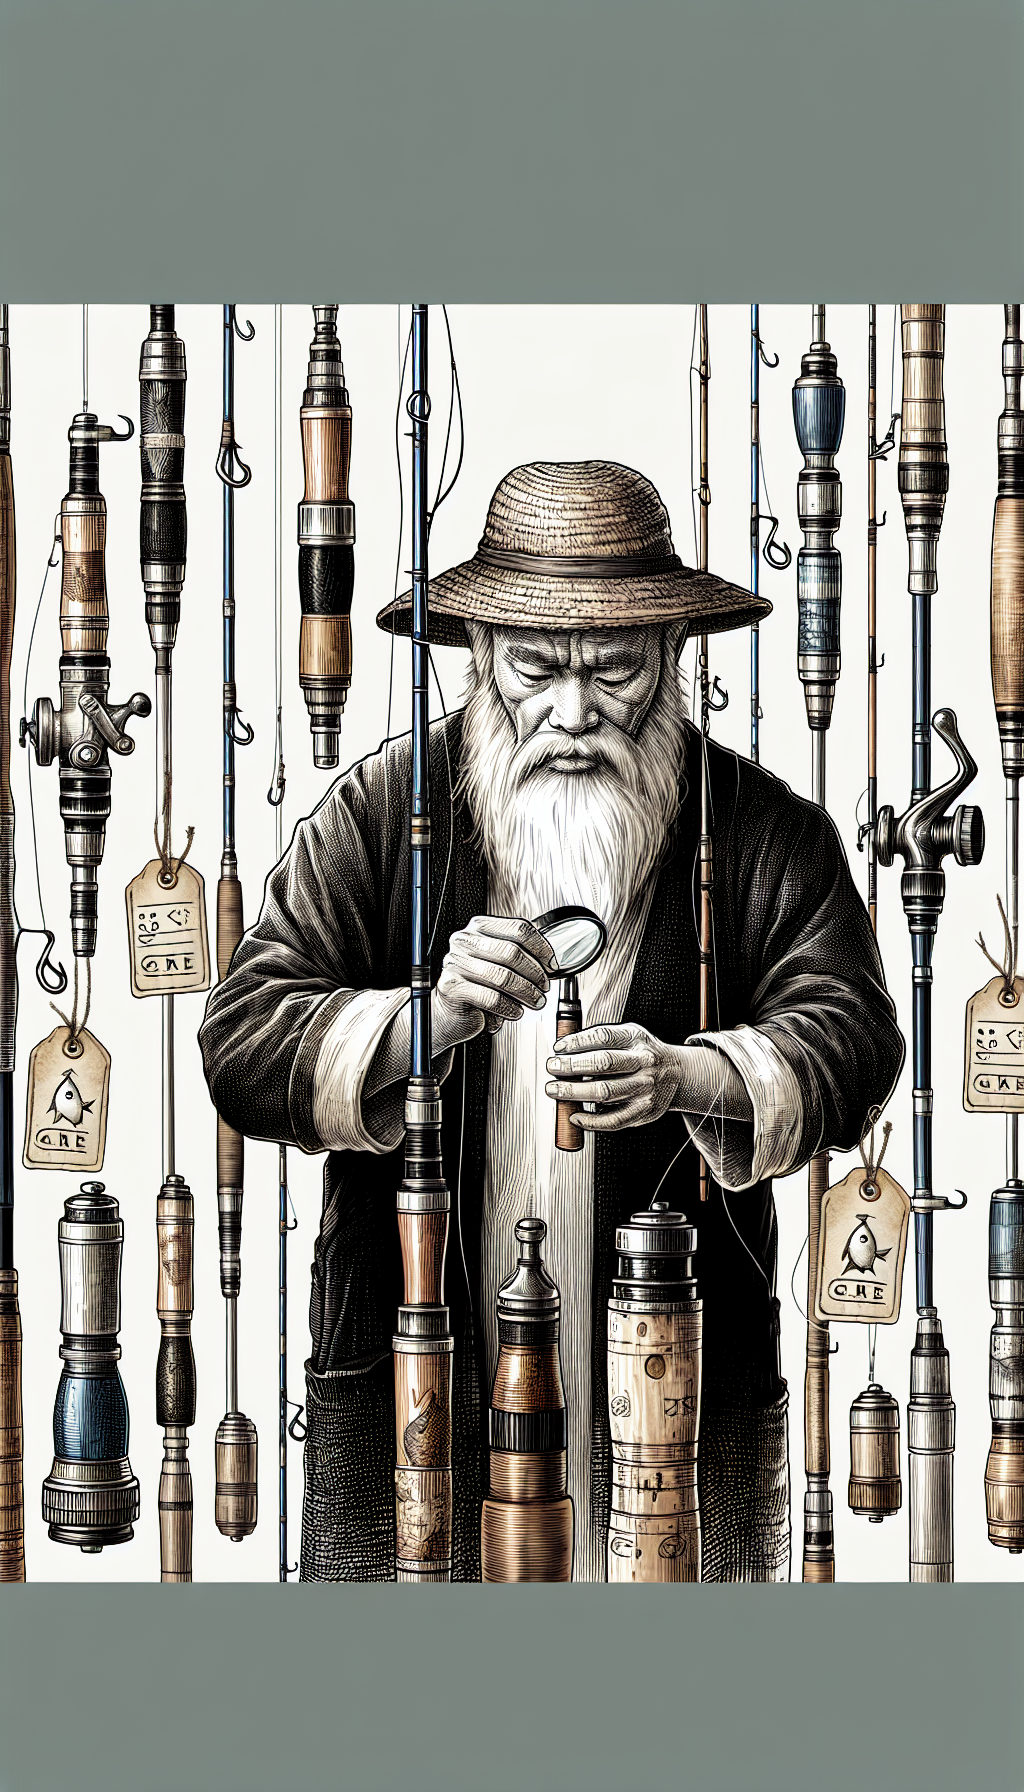 An illustration depicts an elderly, wise fisherman, dressed in vintage attire, meticulously examining a classic fishing rod with a magnifying glass, surrounded by an array of old rods standing like a collection of historical artifacts. Each rod is adorned with a dangling price tag labeled with care symbols and insightful tips, artistically combining line art with watercolor textures to exude an aged charm.